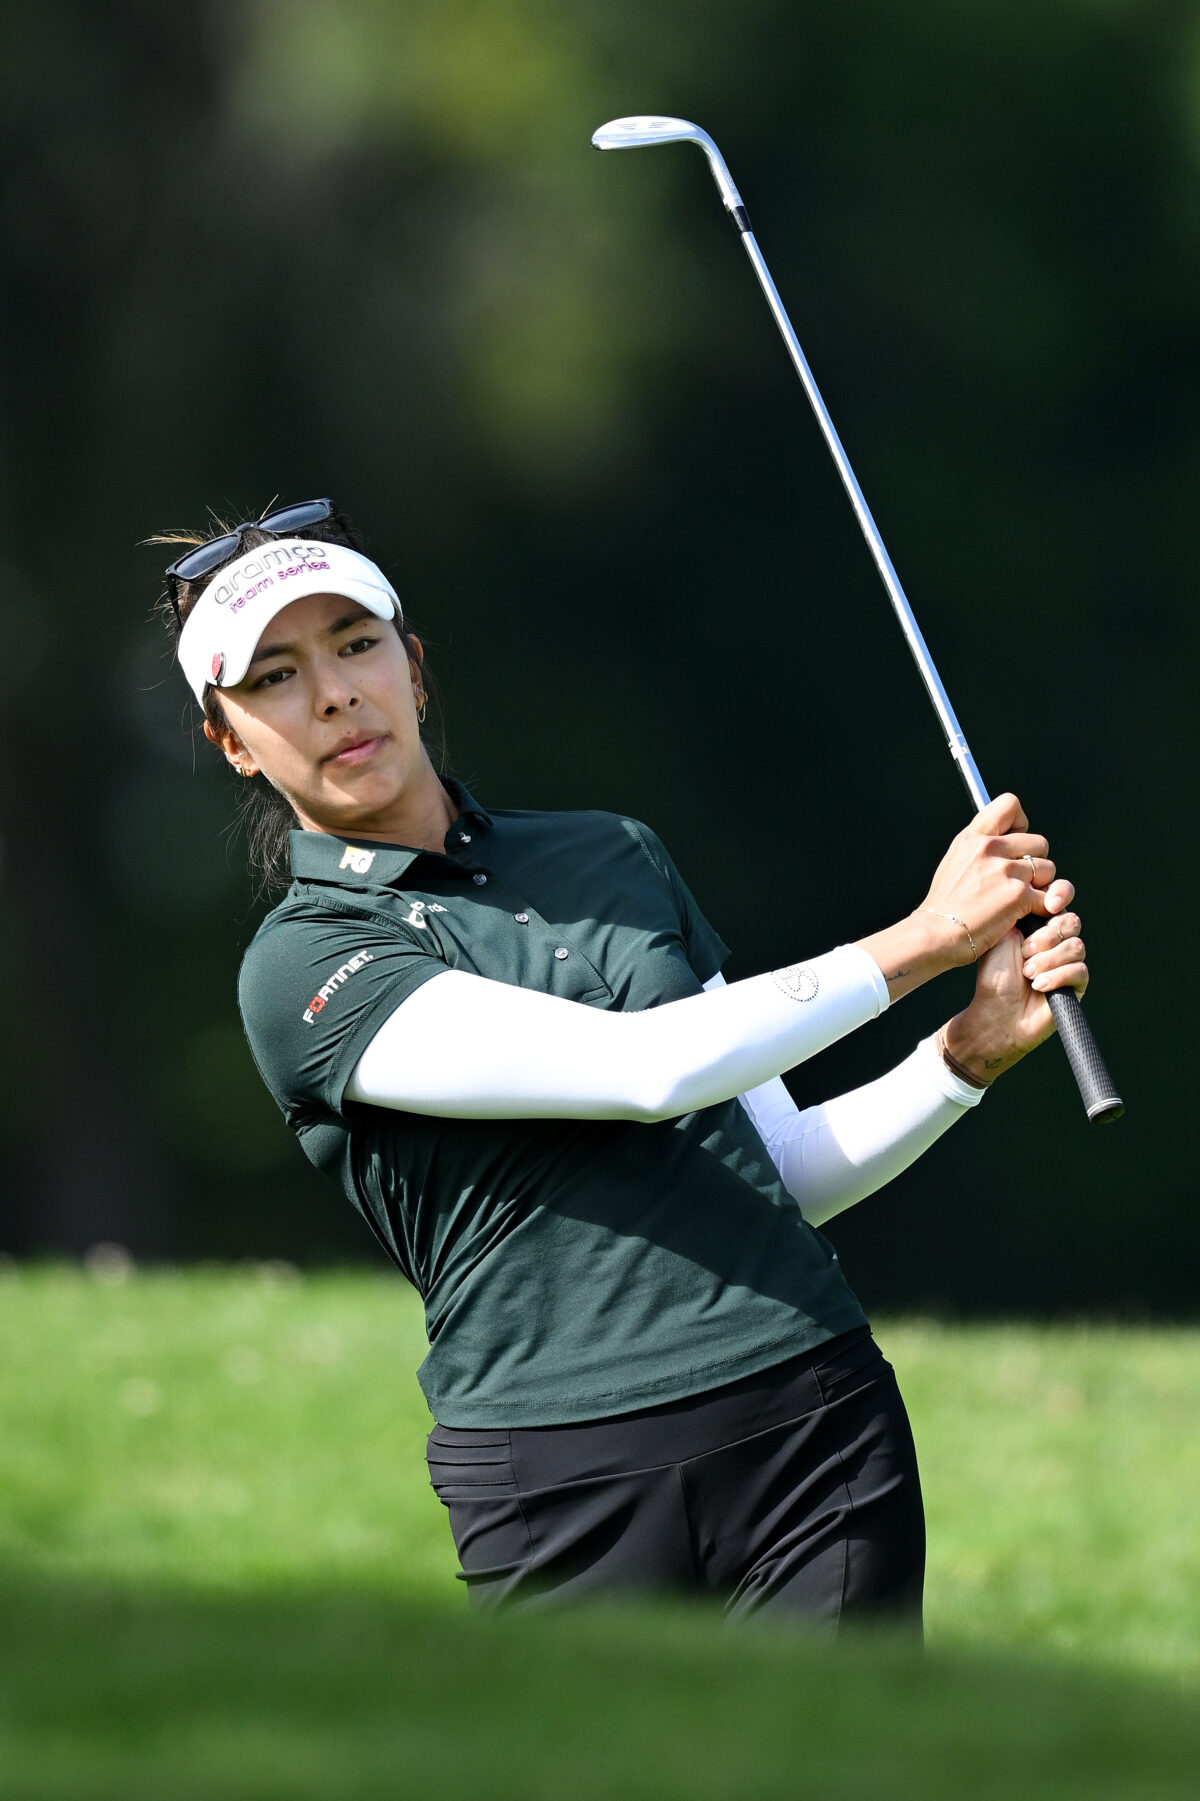 After losing luggage, Alison Lee admits being near top of Amundi Evian leaderboard is ‘nerve-wracking’